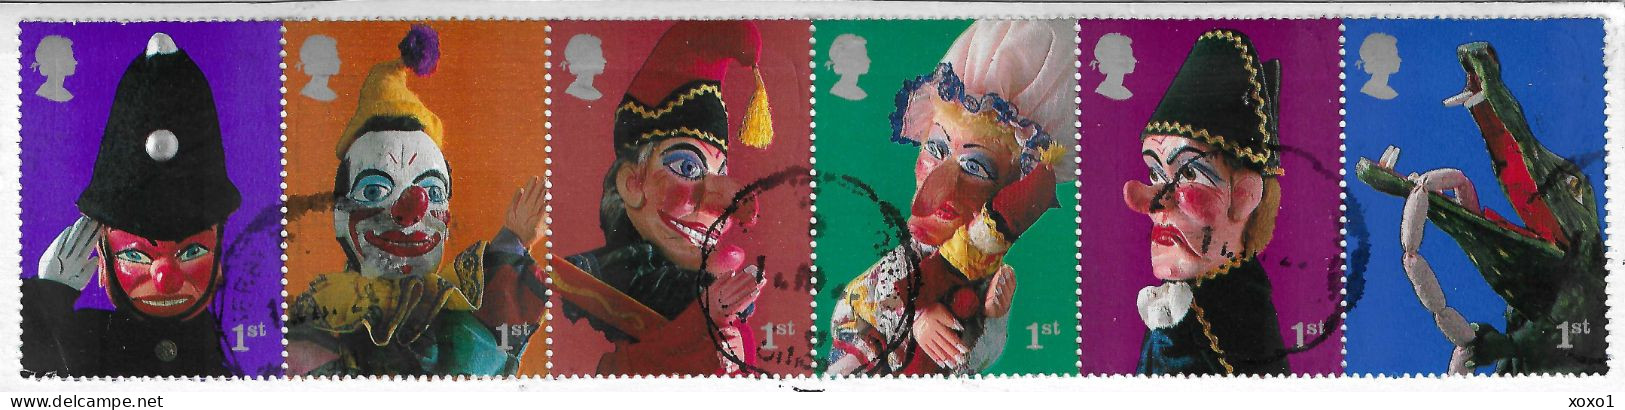 Great Britain 2001 MiNr. 1946 - 1951 Großbritannien Hand Puppet Theater: Punch And Judy Childhood Dolls 6v Used 7.50 € - Dolls